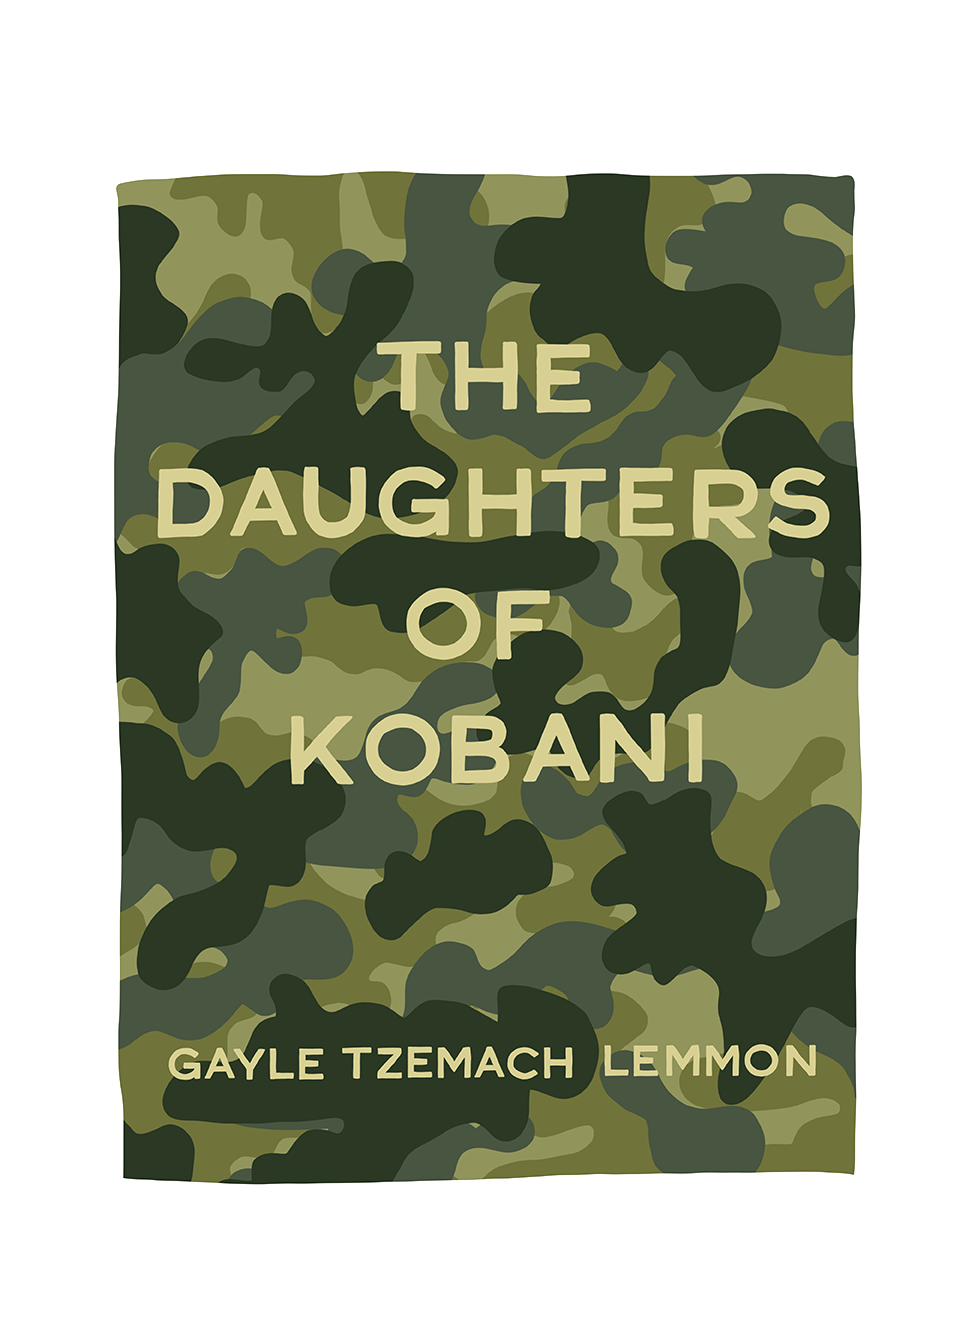 The Daughters of Kobani by Gayle Tzemach Lemmon  | illustrated by Alicia Carvalho